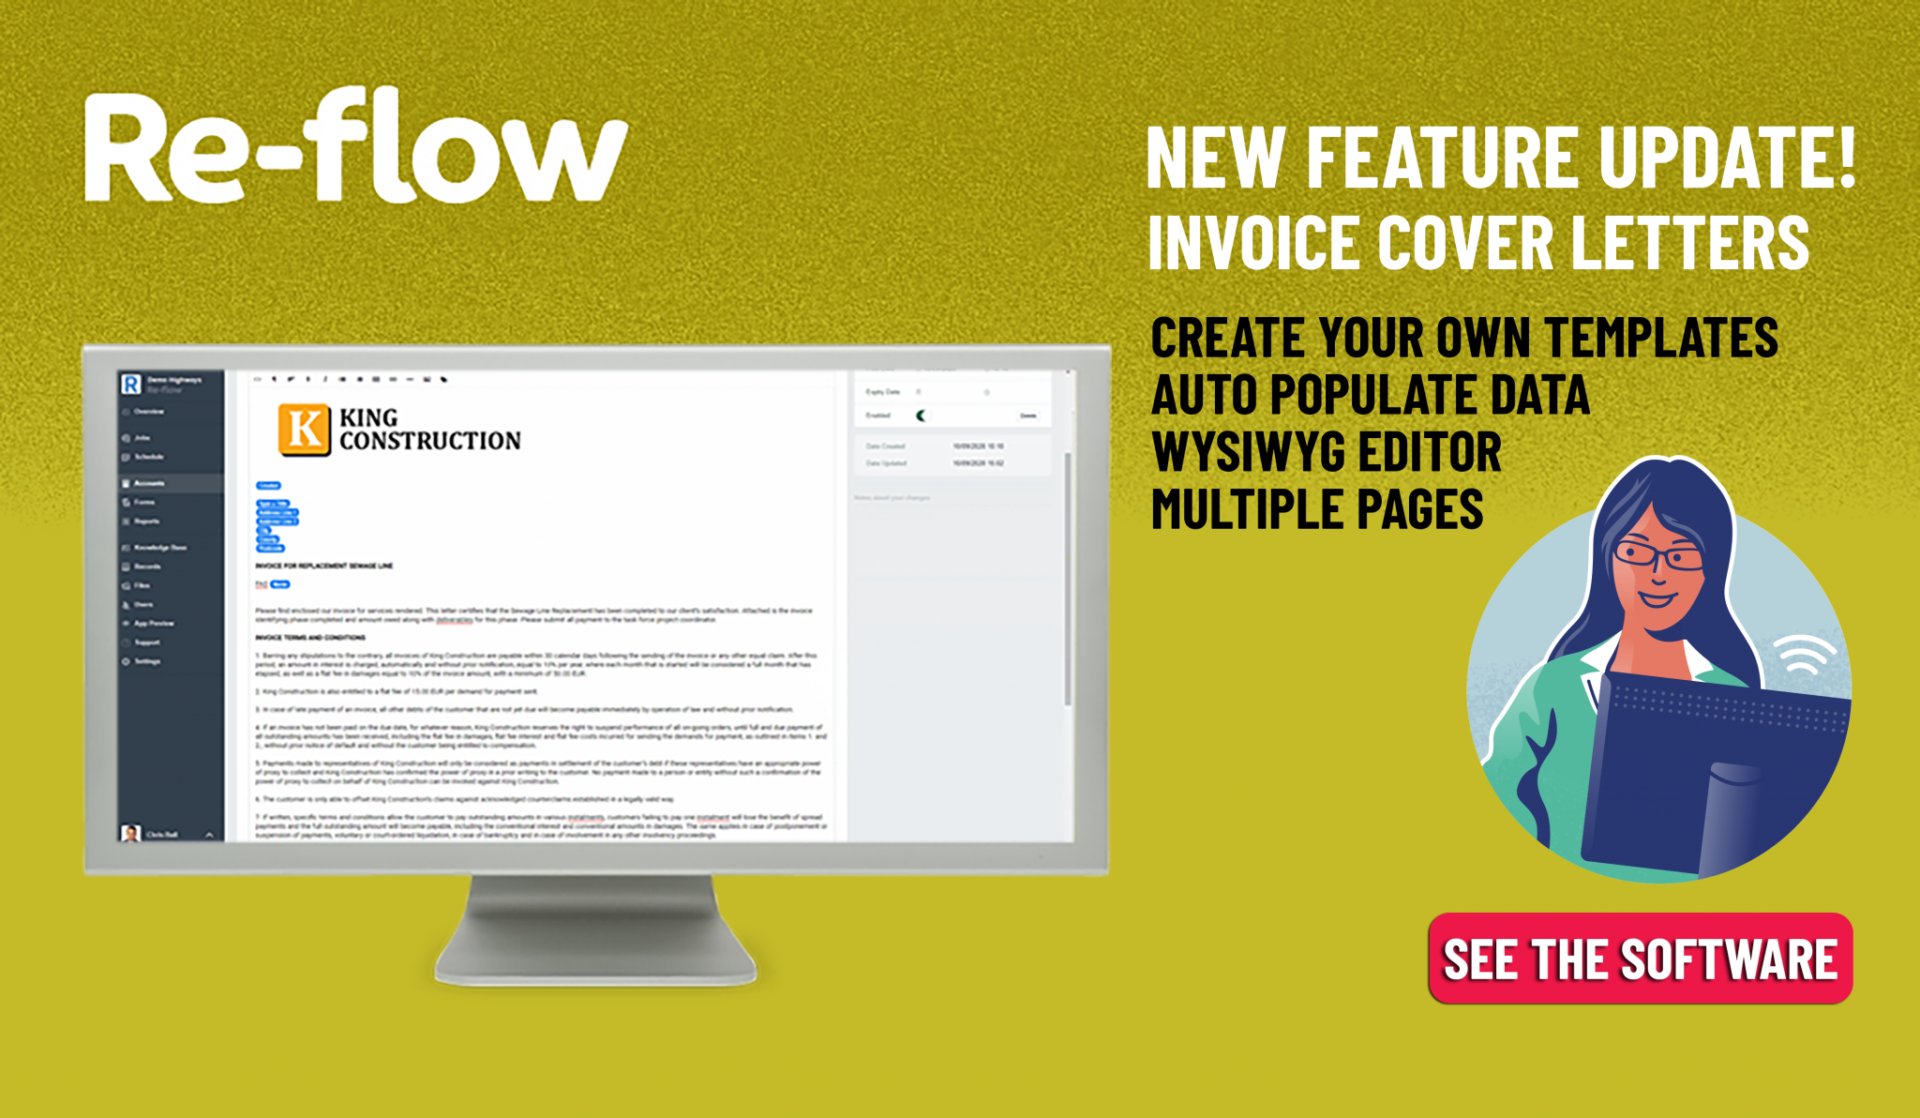 New Feature Update - Invoice Cover Letters